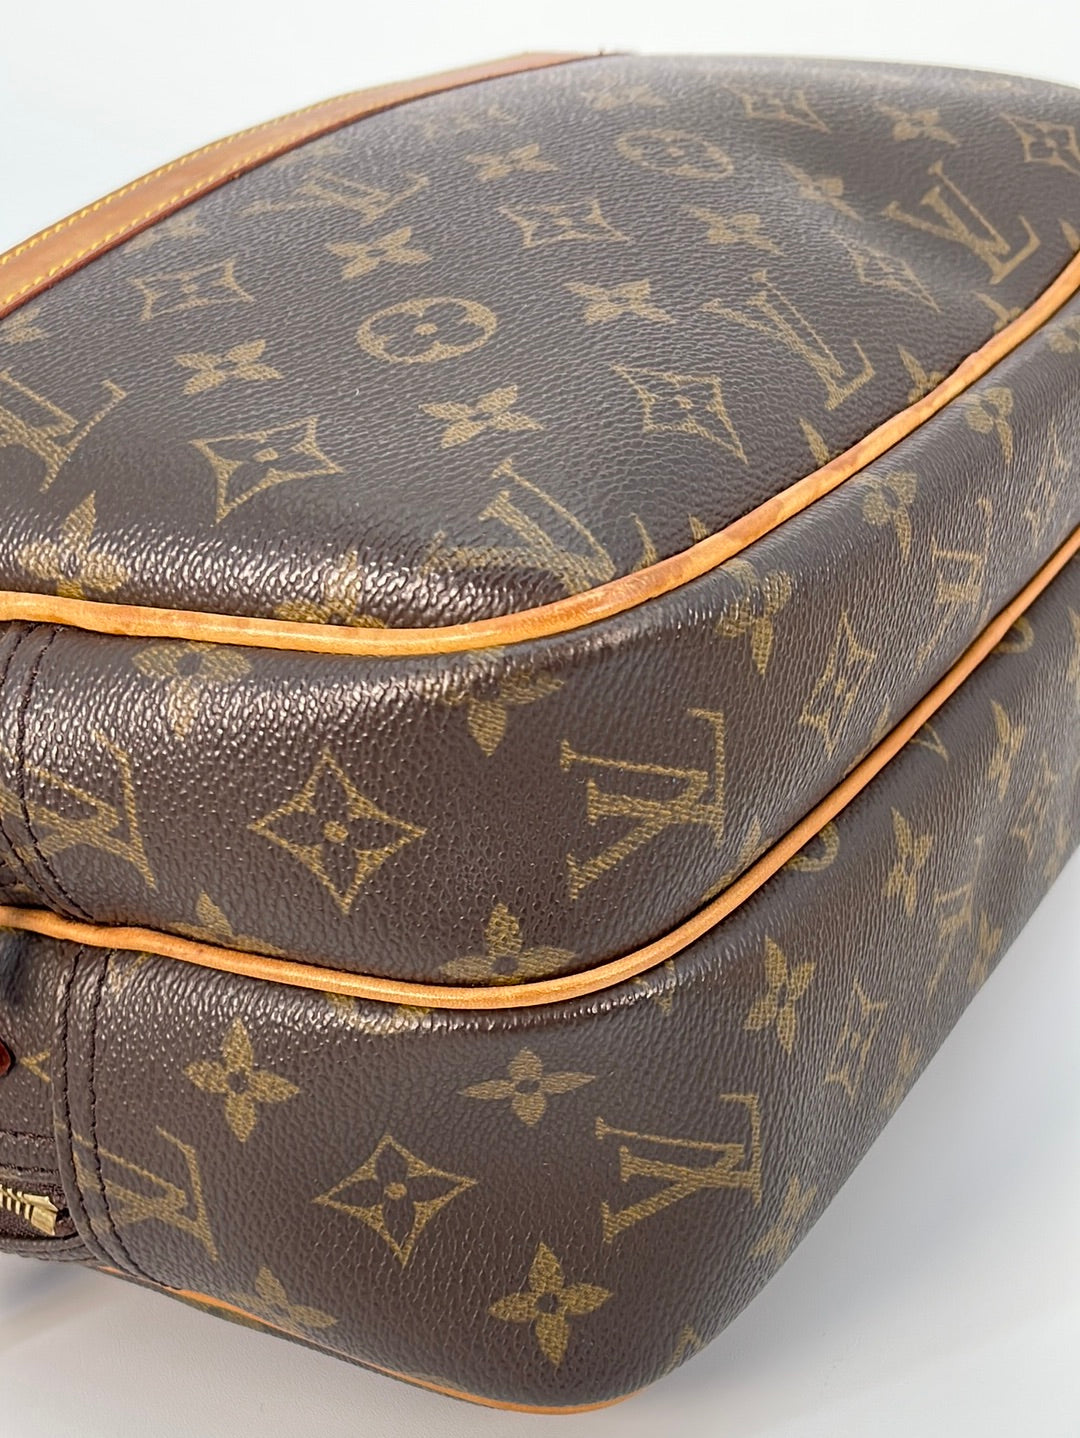 Louis Vuitton Monogram Reporter PM Crossbody just in! Call us at